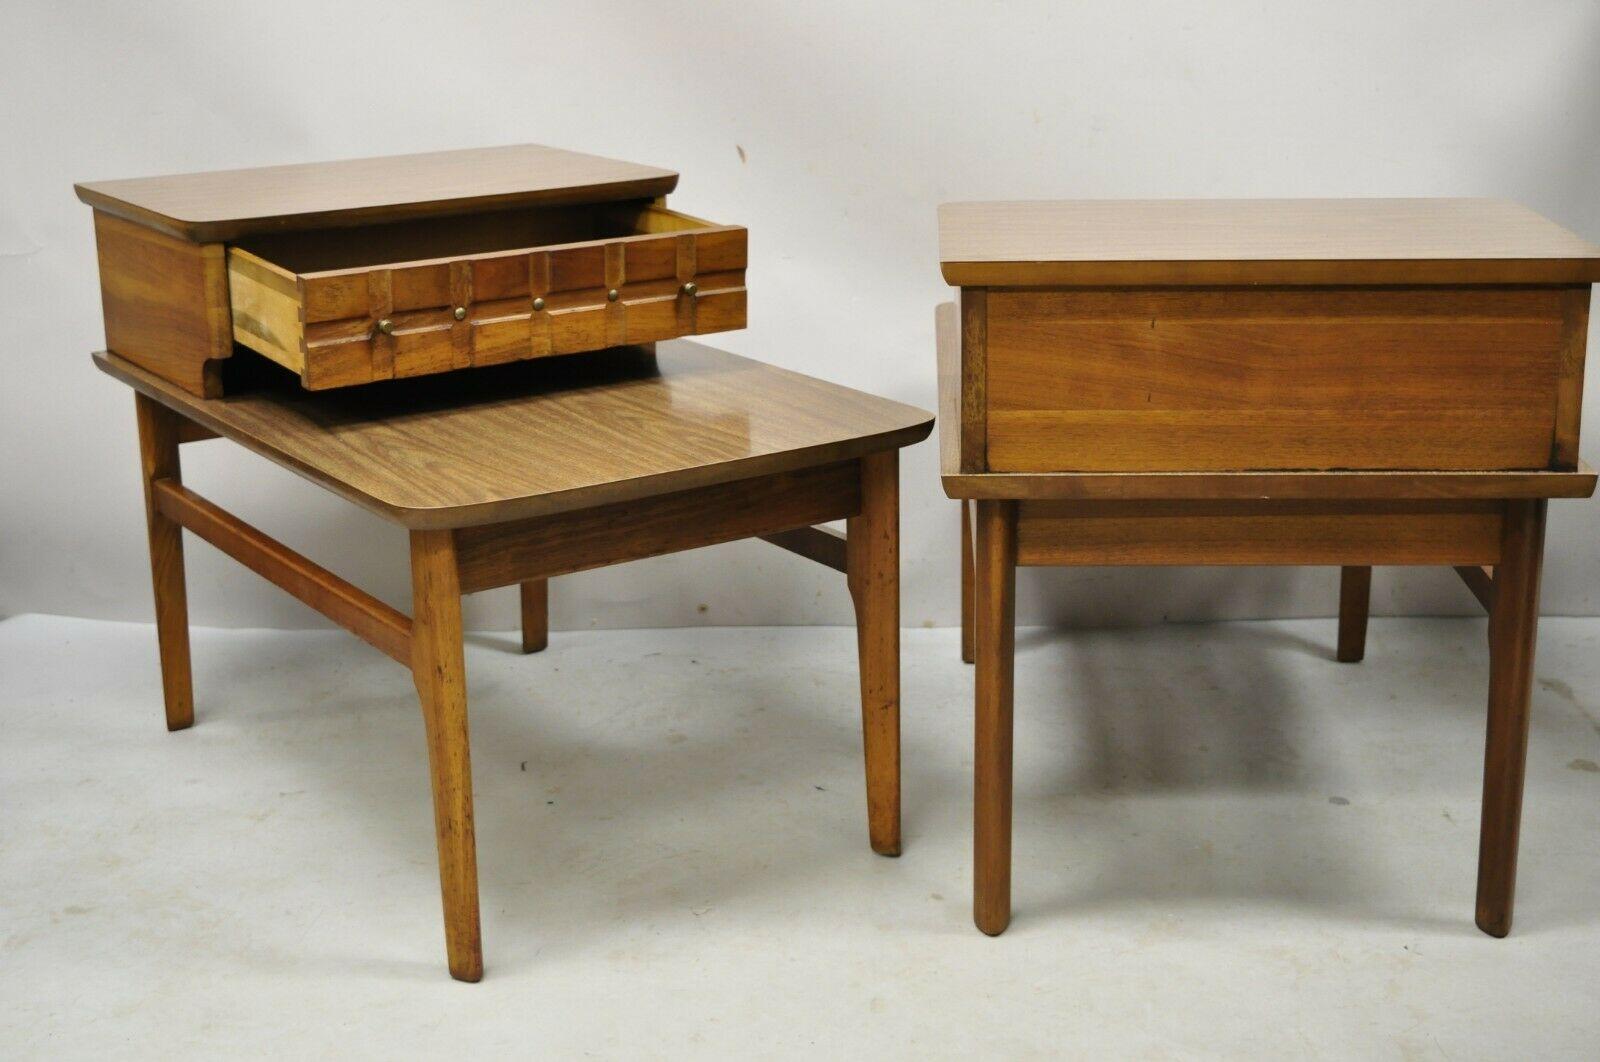 Mersman Mid Century Modern Walnut and Laminate Step Side End Tables - a Pair For Sale 1